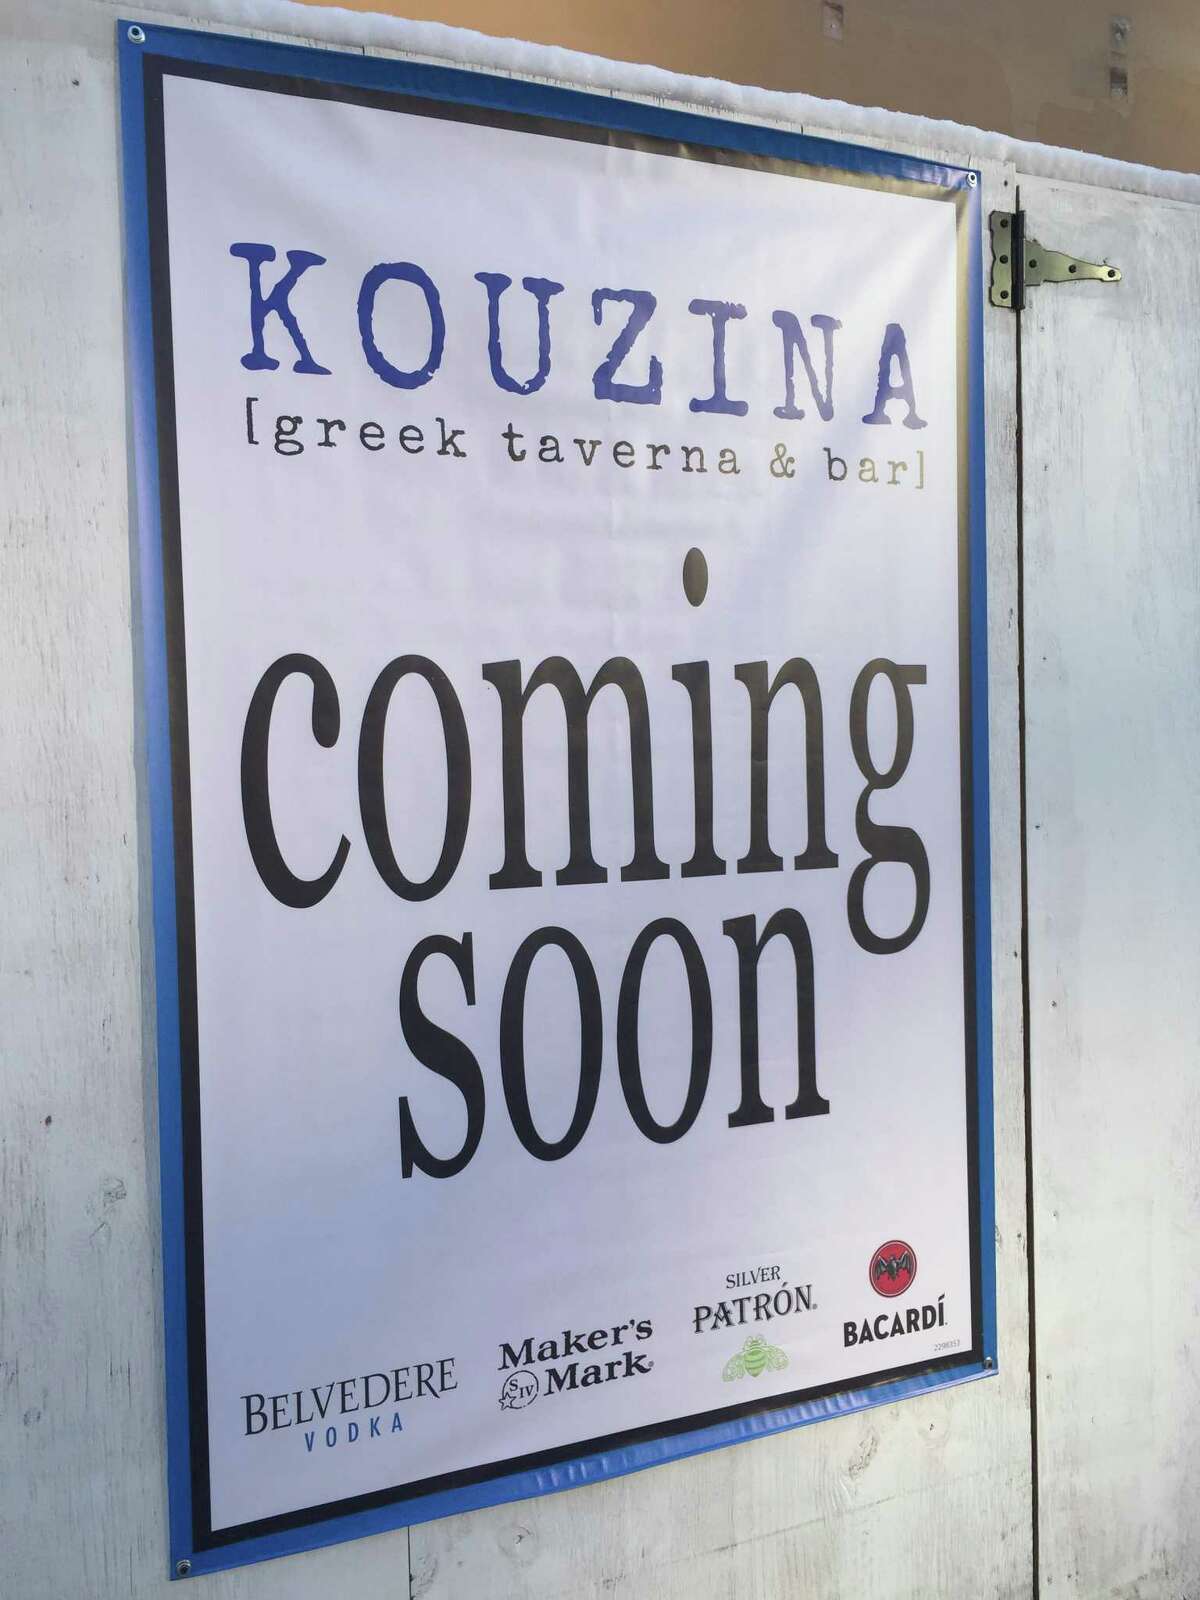 Greek restaurant Kouzina is scheduled to open in the second half of April 2019 at 223 Main St., in downtown Stamford, Conn.